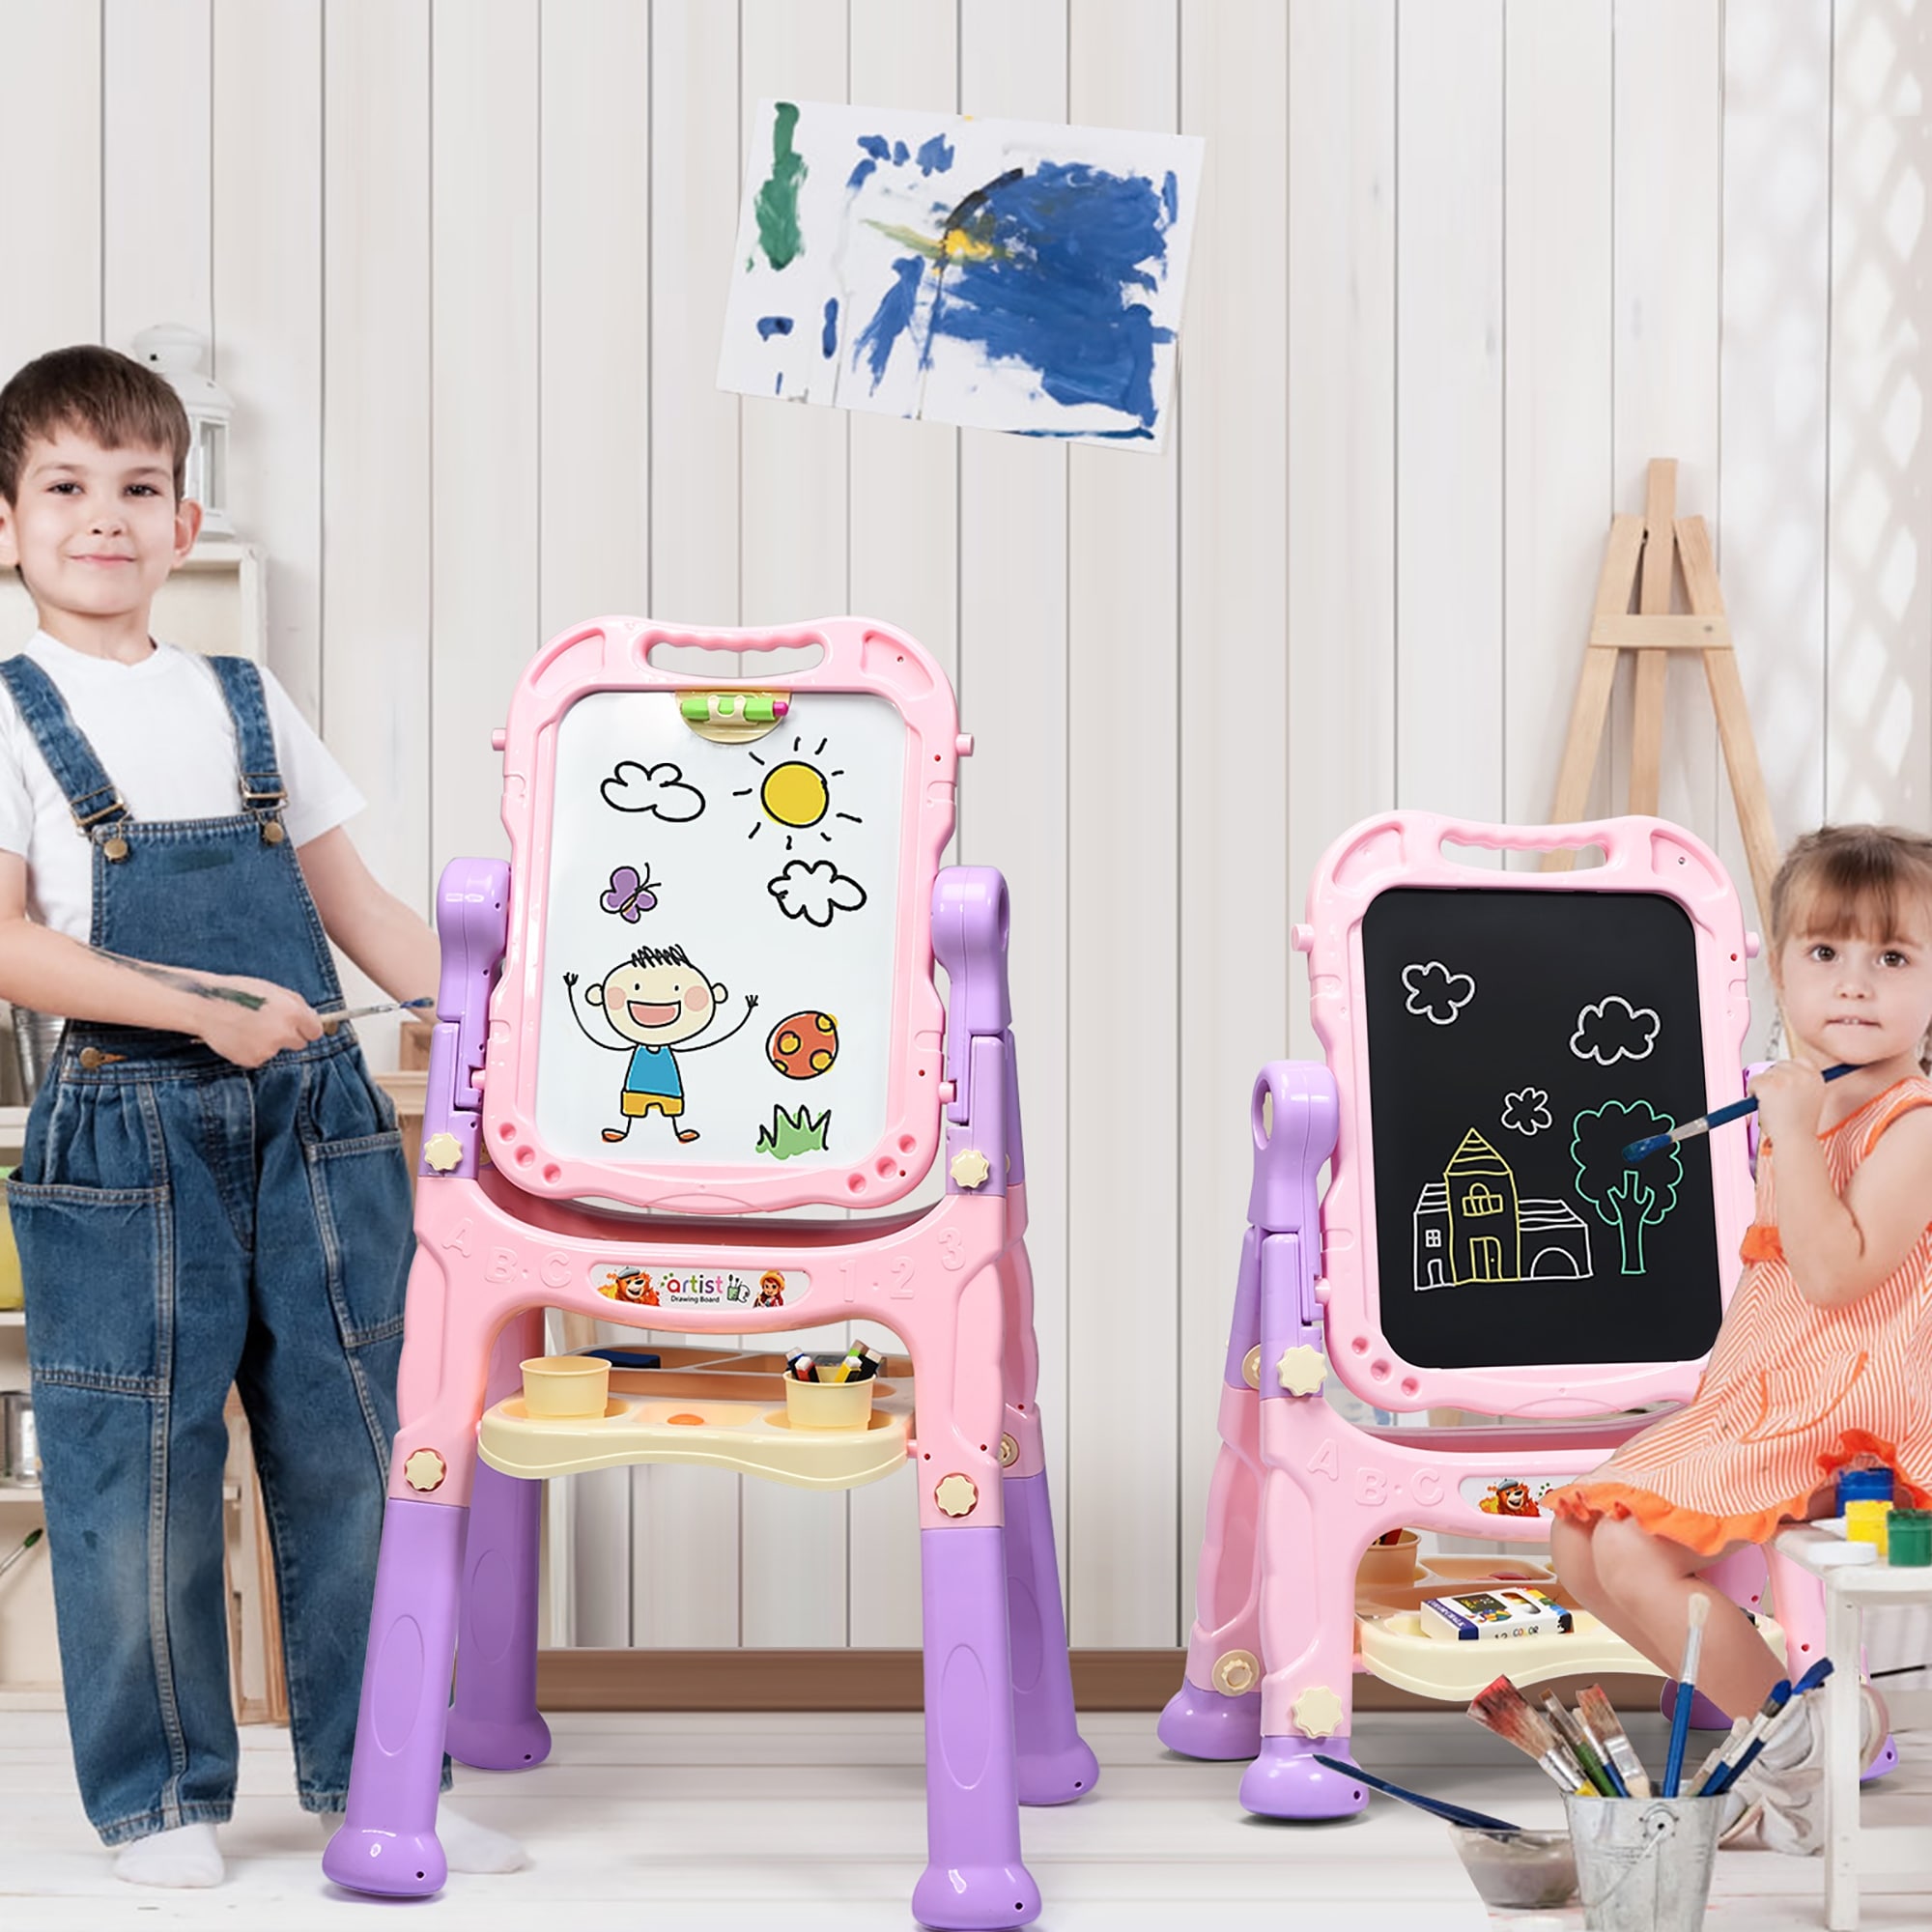 https://ak1.ostkcdn.com/images/products/is/images/direct/7925e19507c31653f503c720cb1f4699727faff1/Costway-Height-Adjustable-Kids-Art-Easel-Magnetic-Double-Sided-Board.jpg